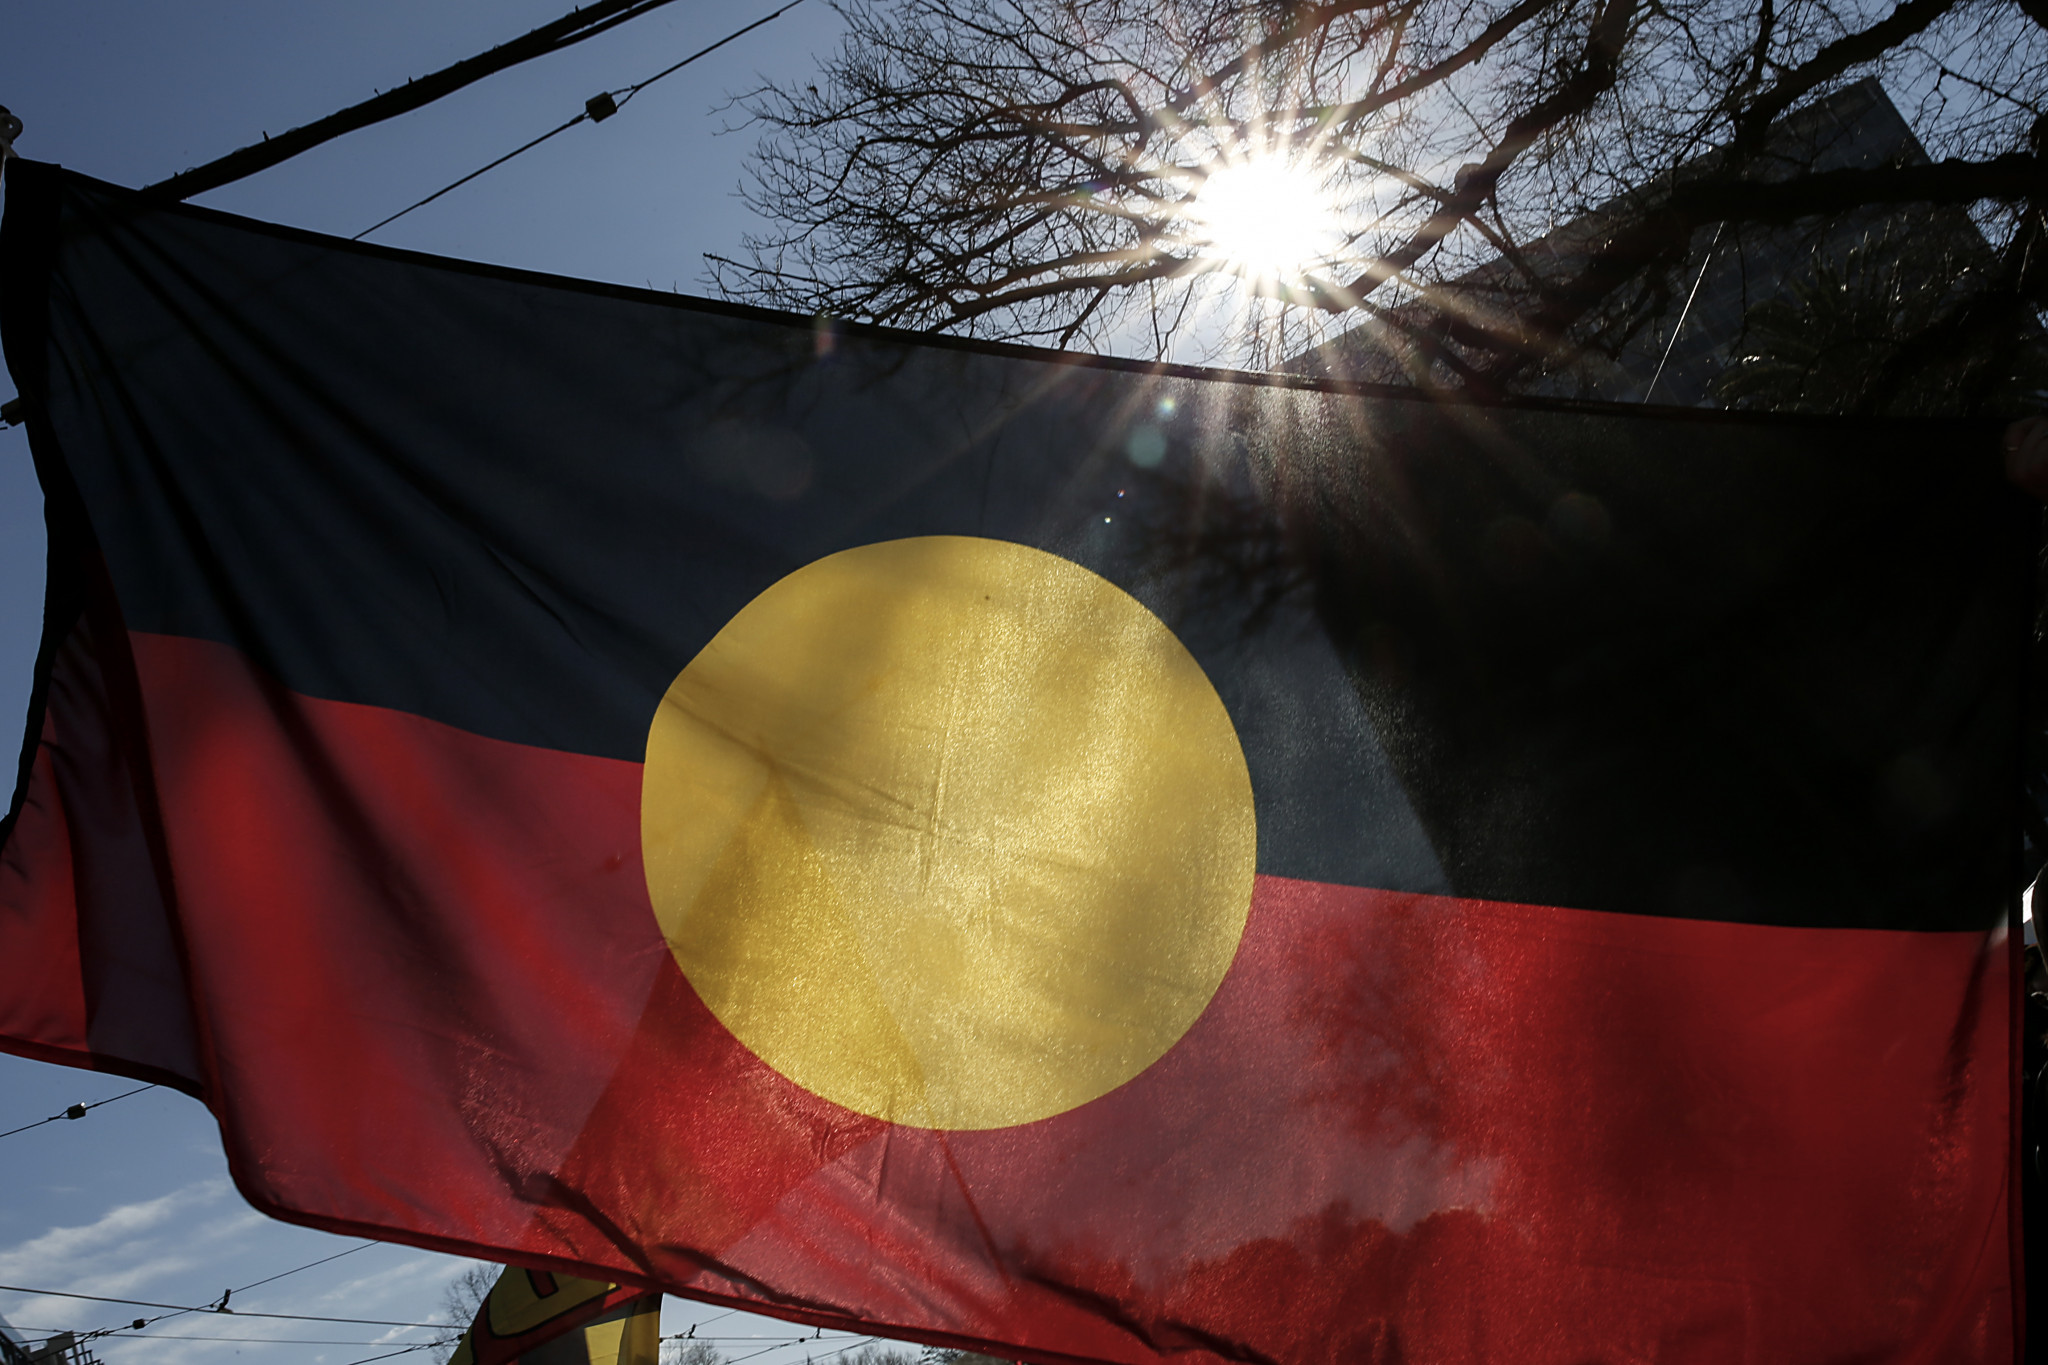 The reconciliation action plan calls on Australia to amend past issues for its indigenous communities ©Getty Images